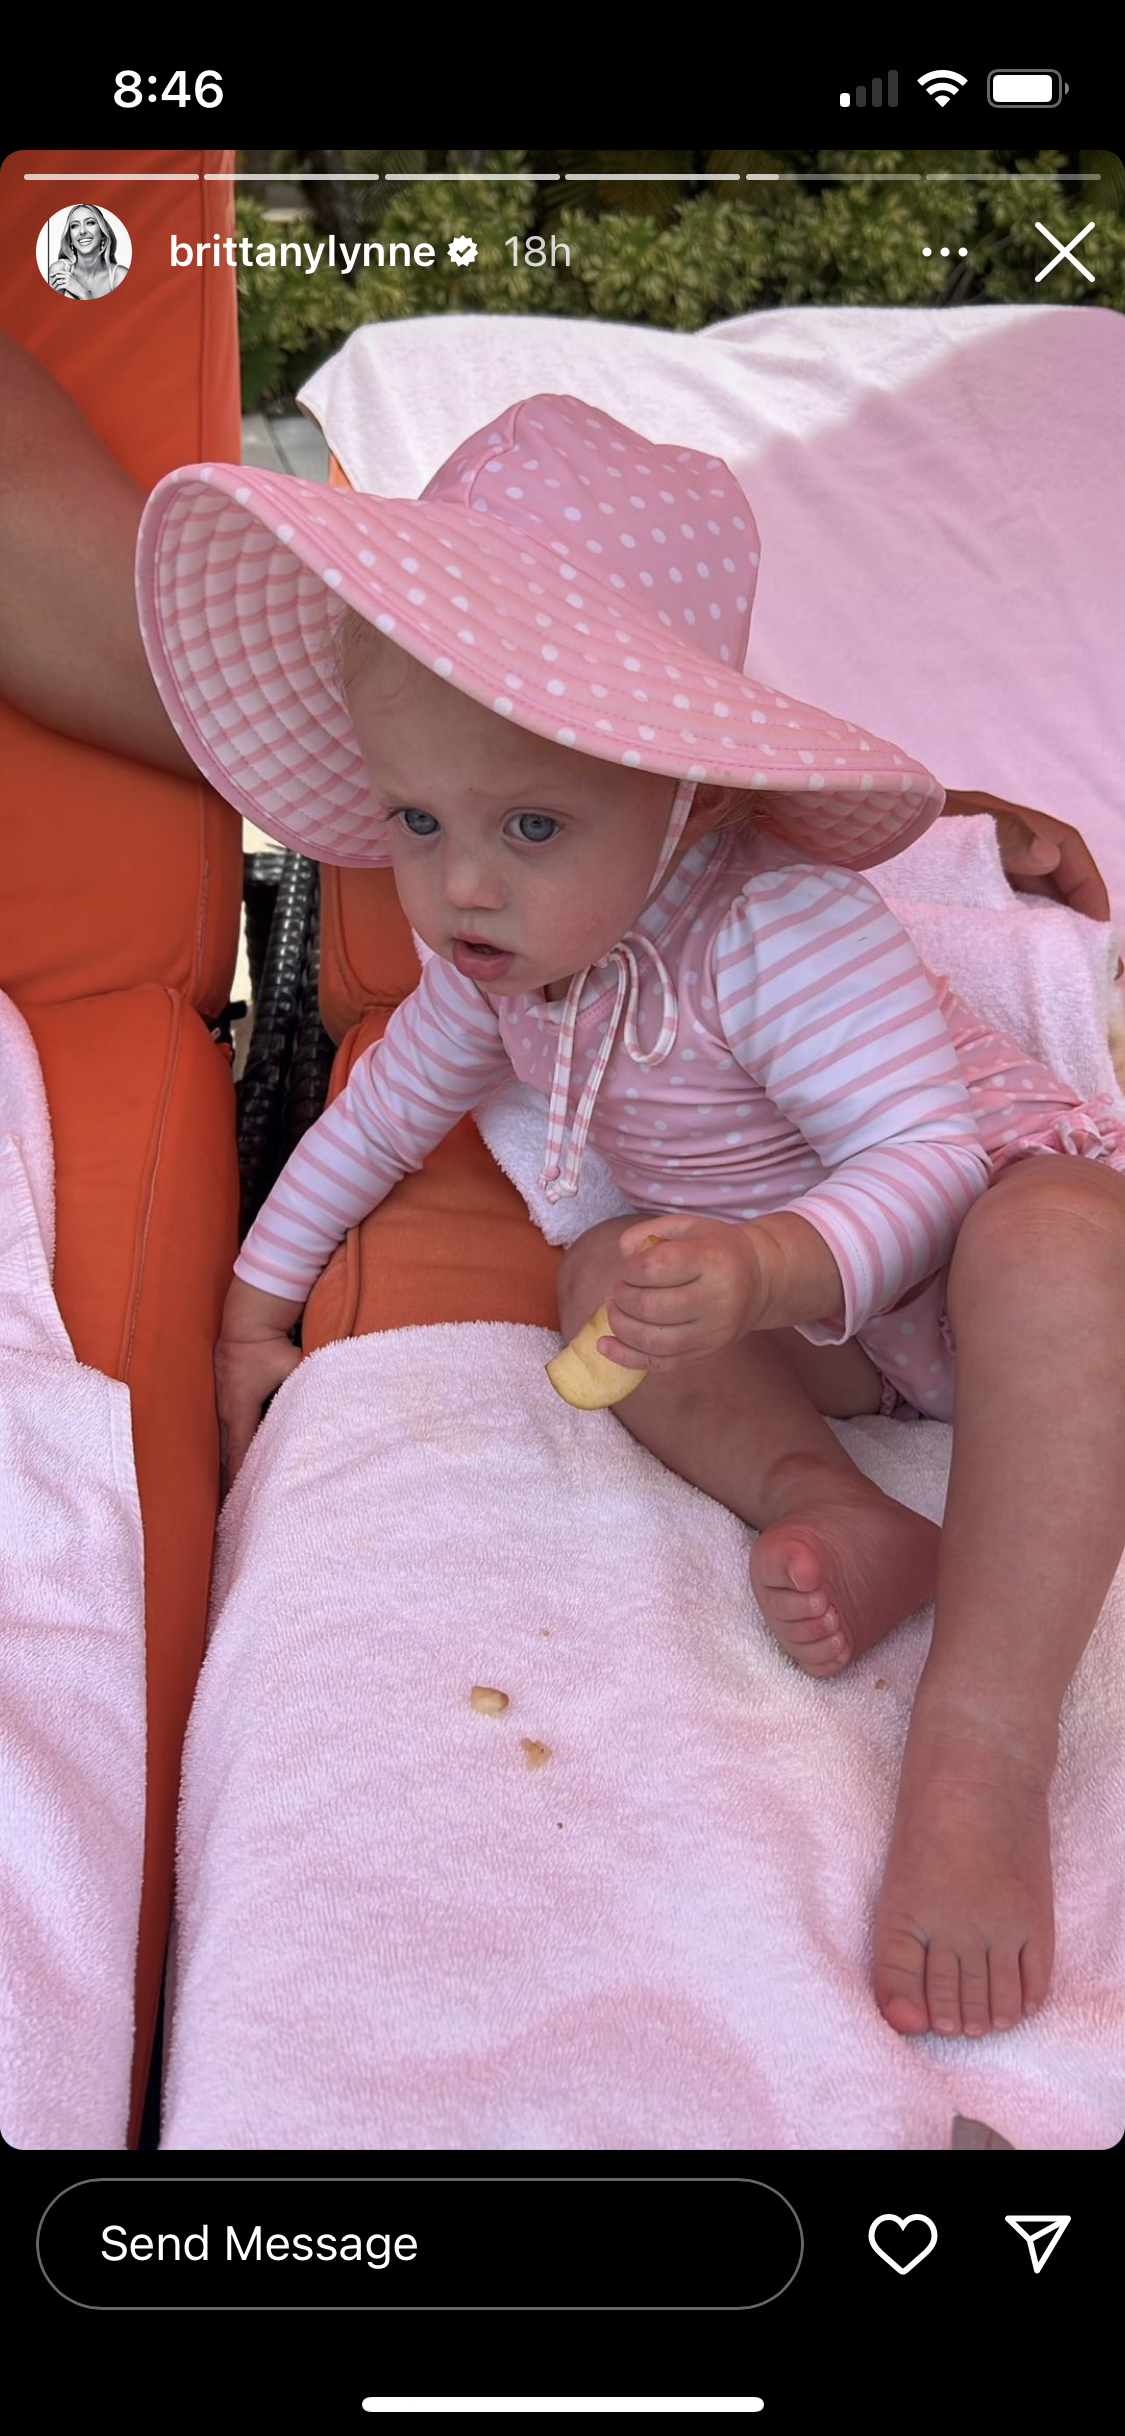 Brittany Mahomes' Daughter Wears Louis Vuitton Sunhat at Beach: Photo